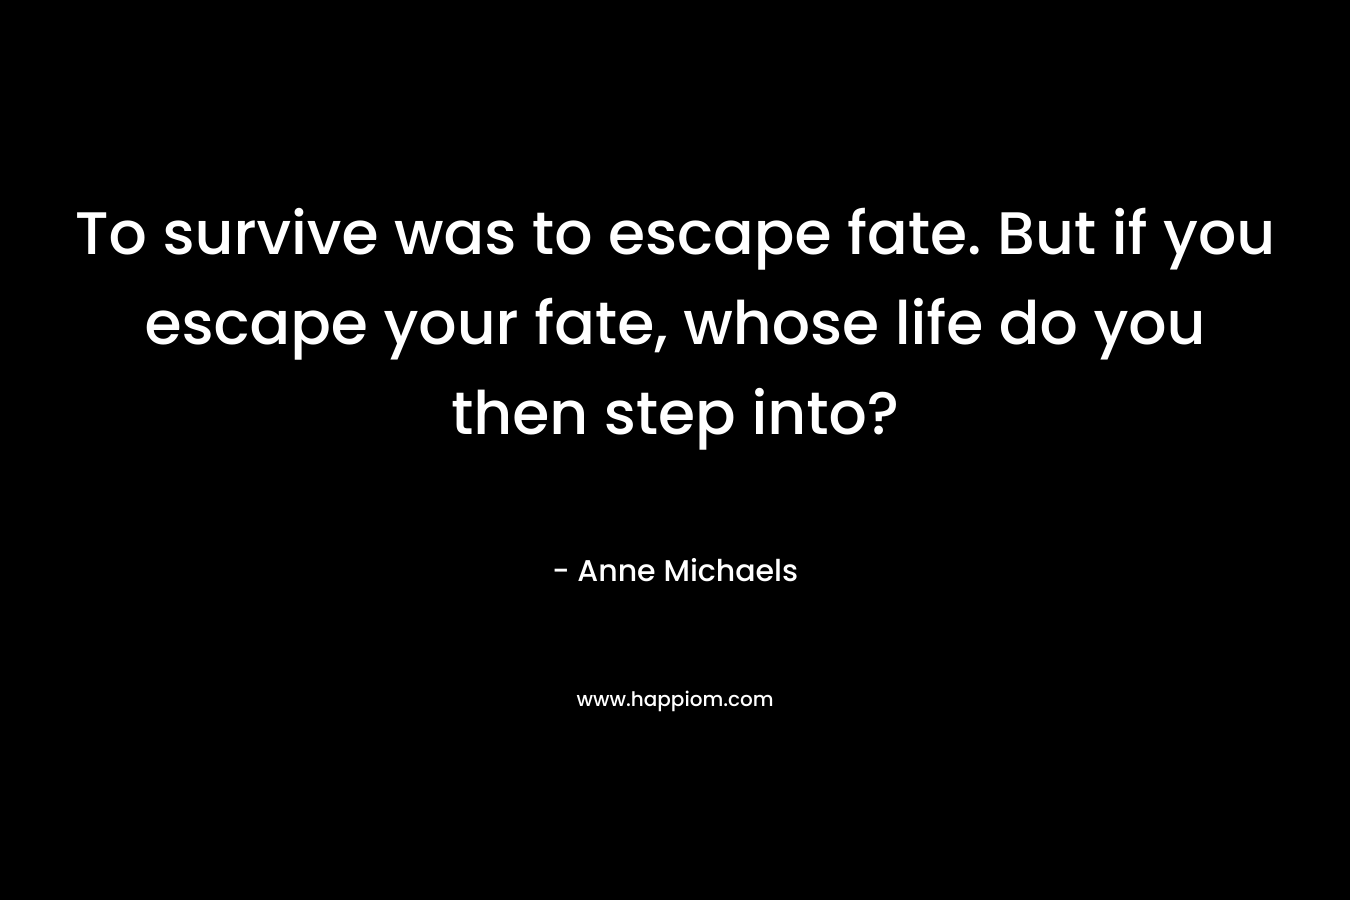 To survive was to escape fate. But if you escape your fate, whose life do you then step into?